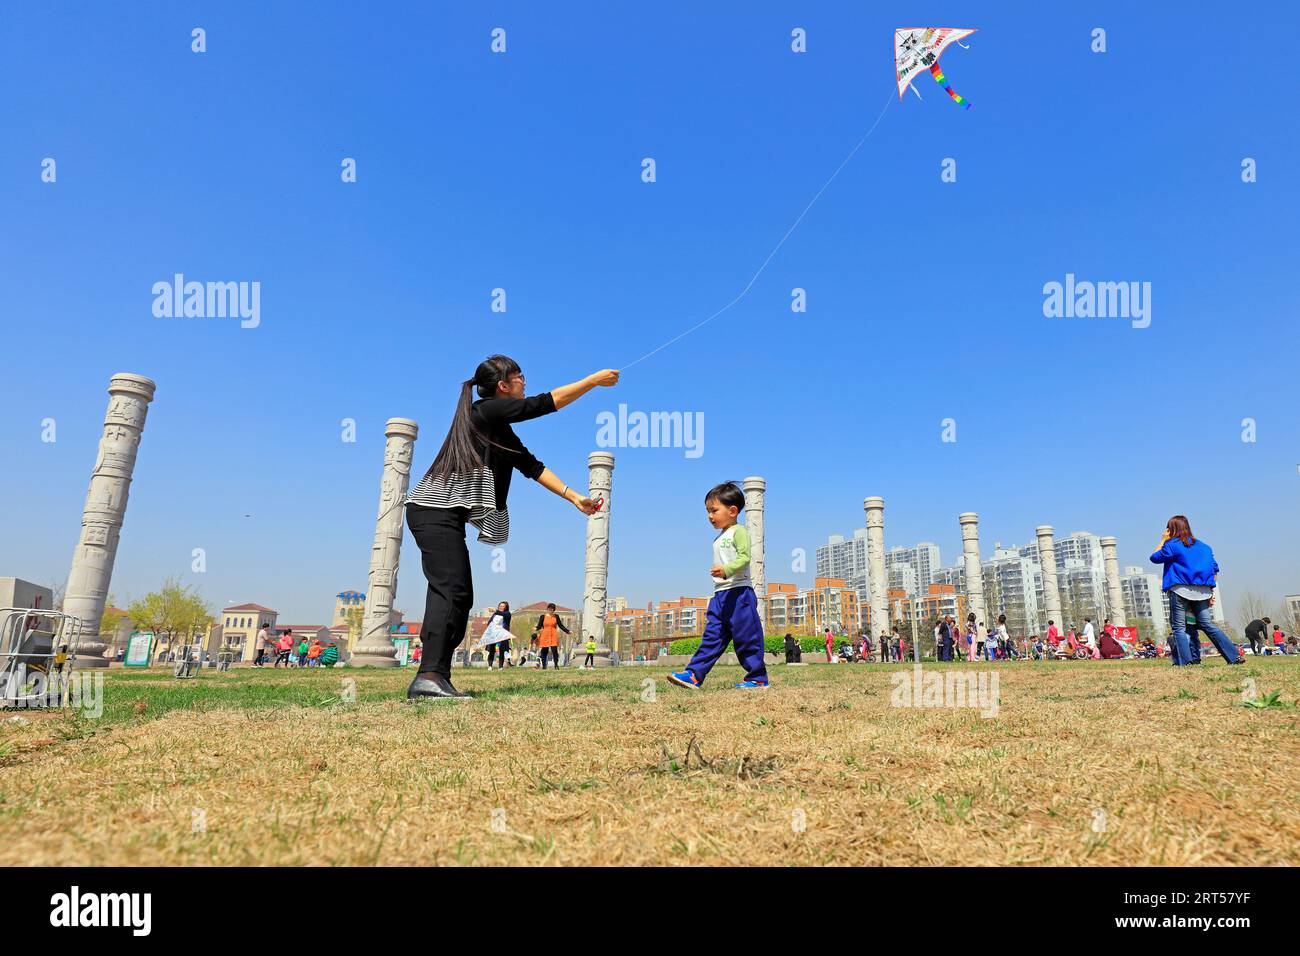 Luannan County - April 15, 2017: people fly kites in the open air, Luannan County, Hebei Province, China, April 15, 2017 Stock Photo